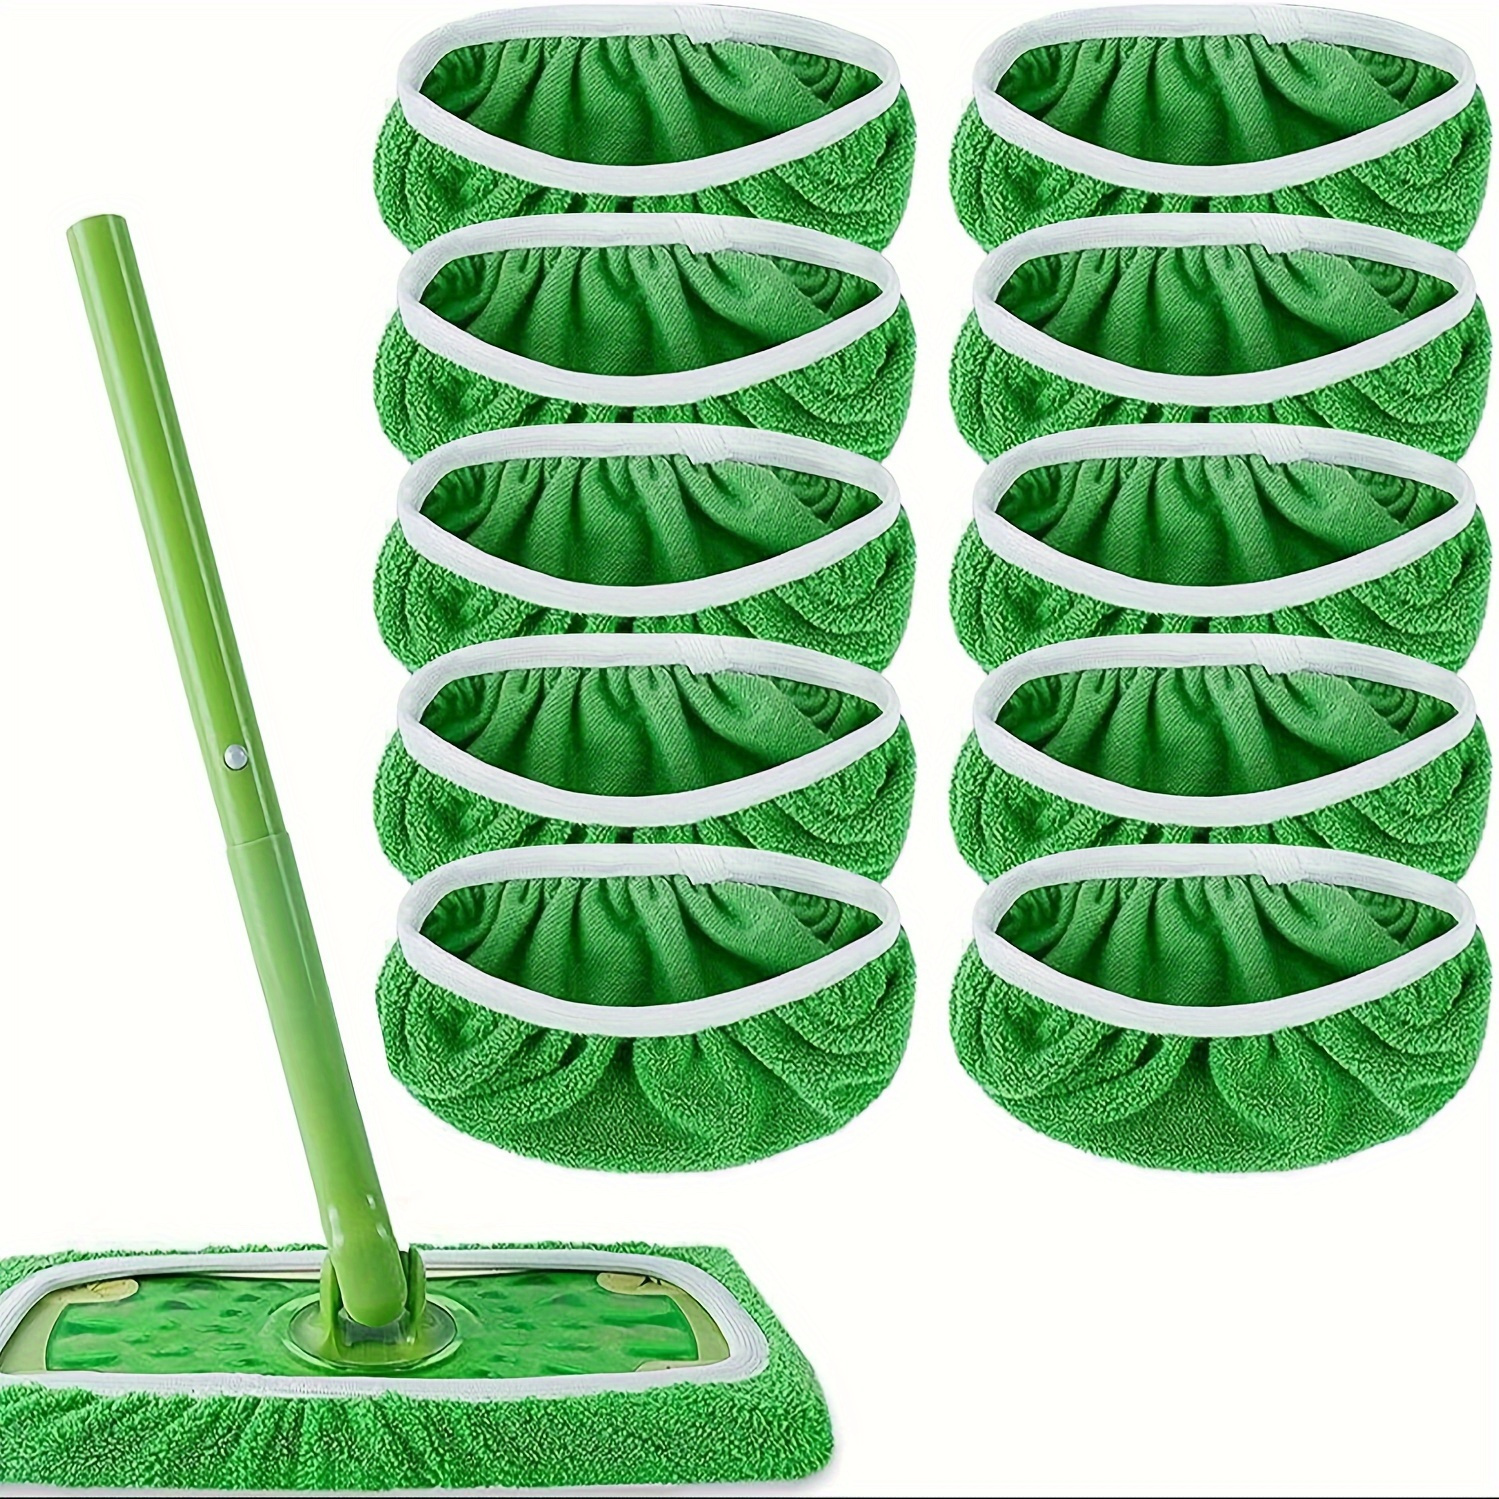 

10pcs Reusable Super Absorbent Mop Replacement Pads - High-dirt And Water Absorbing, Washable, Durable, Easy To Clean, Wet And Dry Use - Premium Cleaning Supplies For Flat Floors